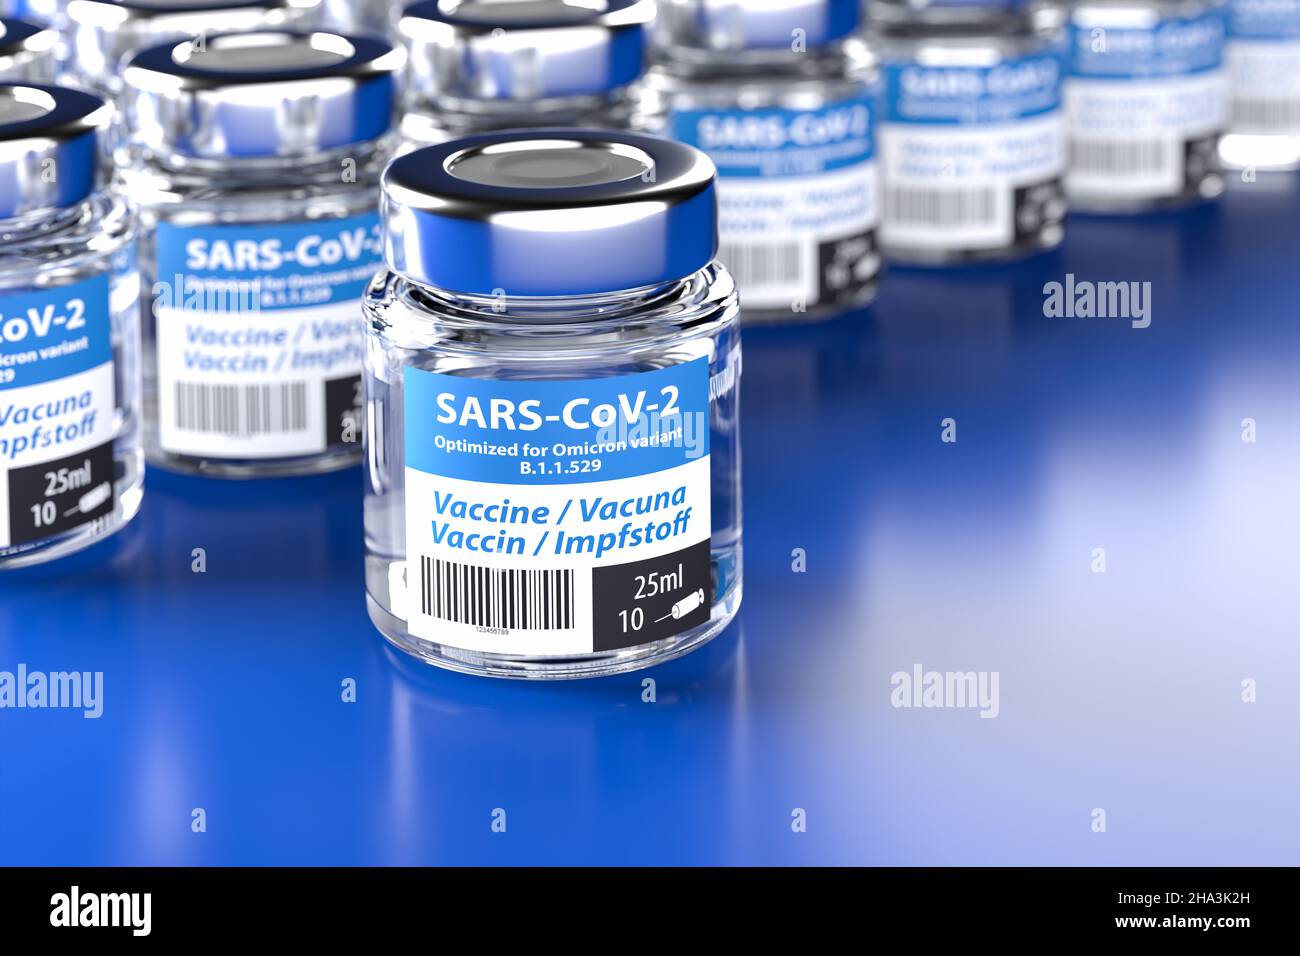 A Vaccine against the SARS-CoV-2 variant B.1.1.529: Bottles of vaccination. The word vaccination in English, Spanish, French and German on the label Stock Photo